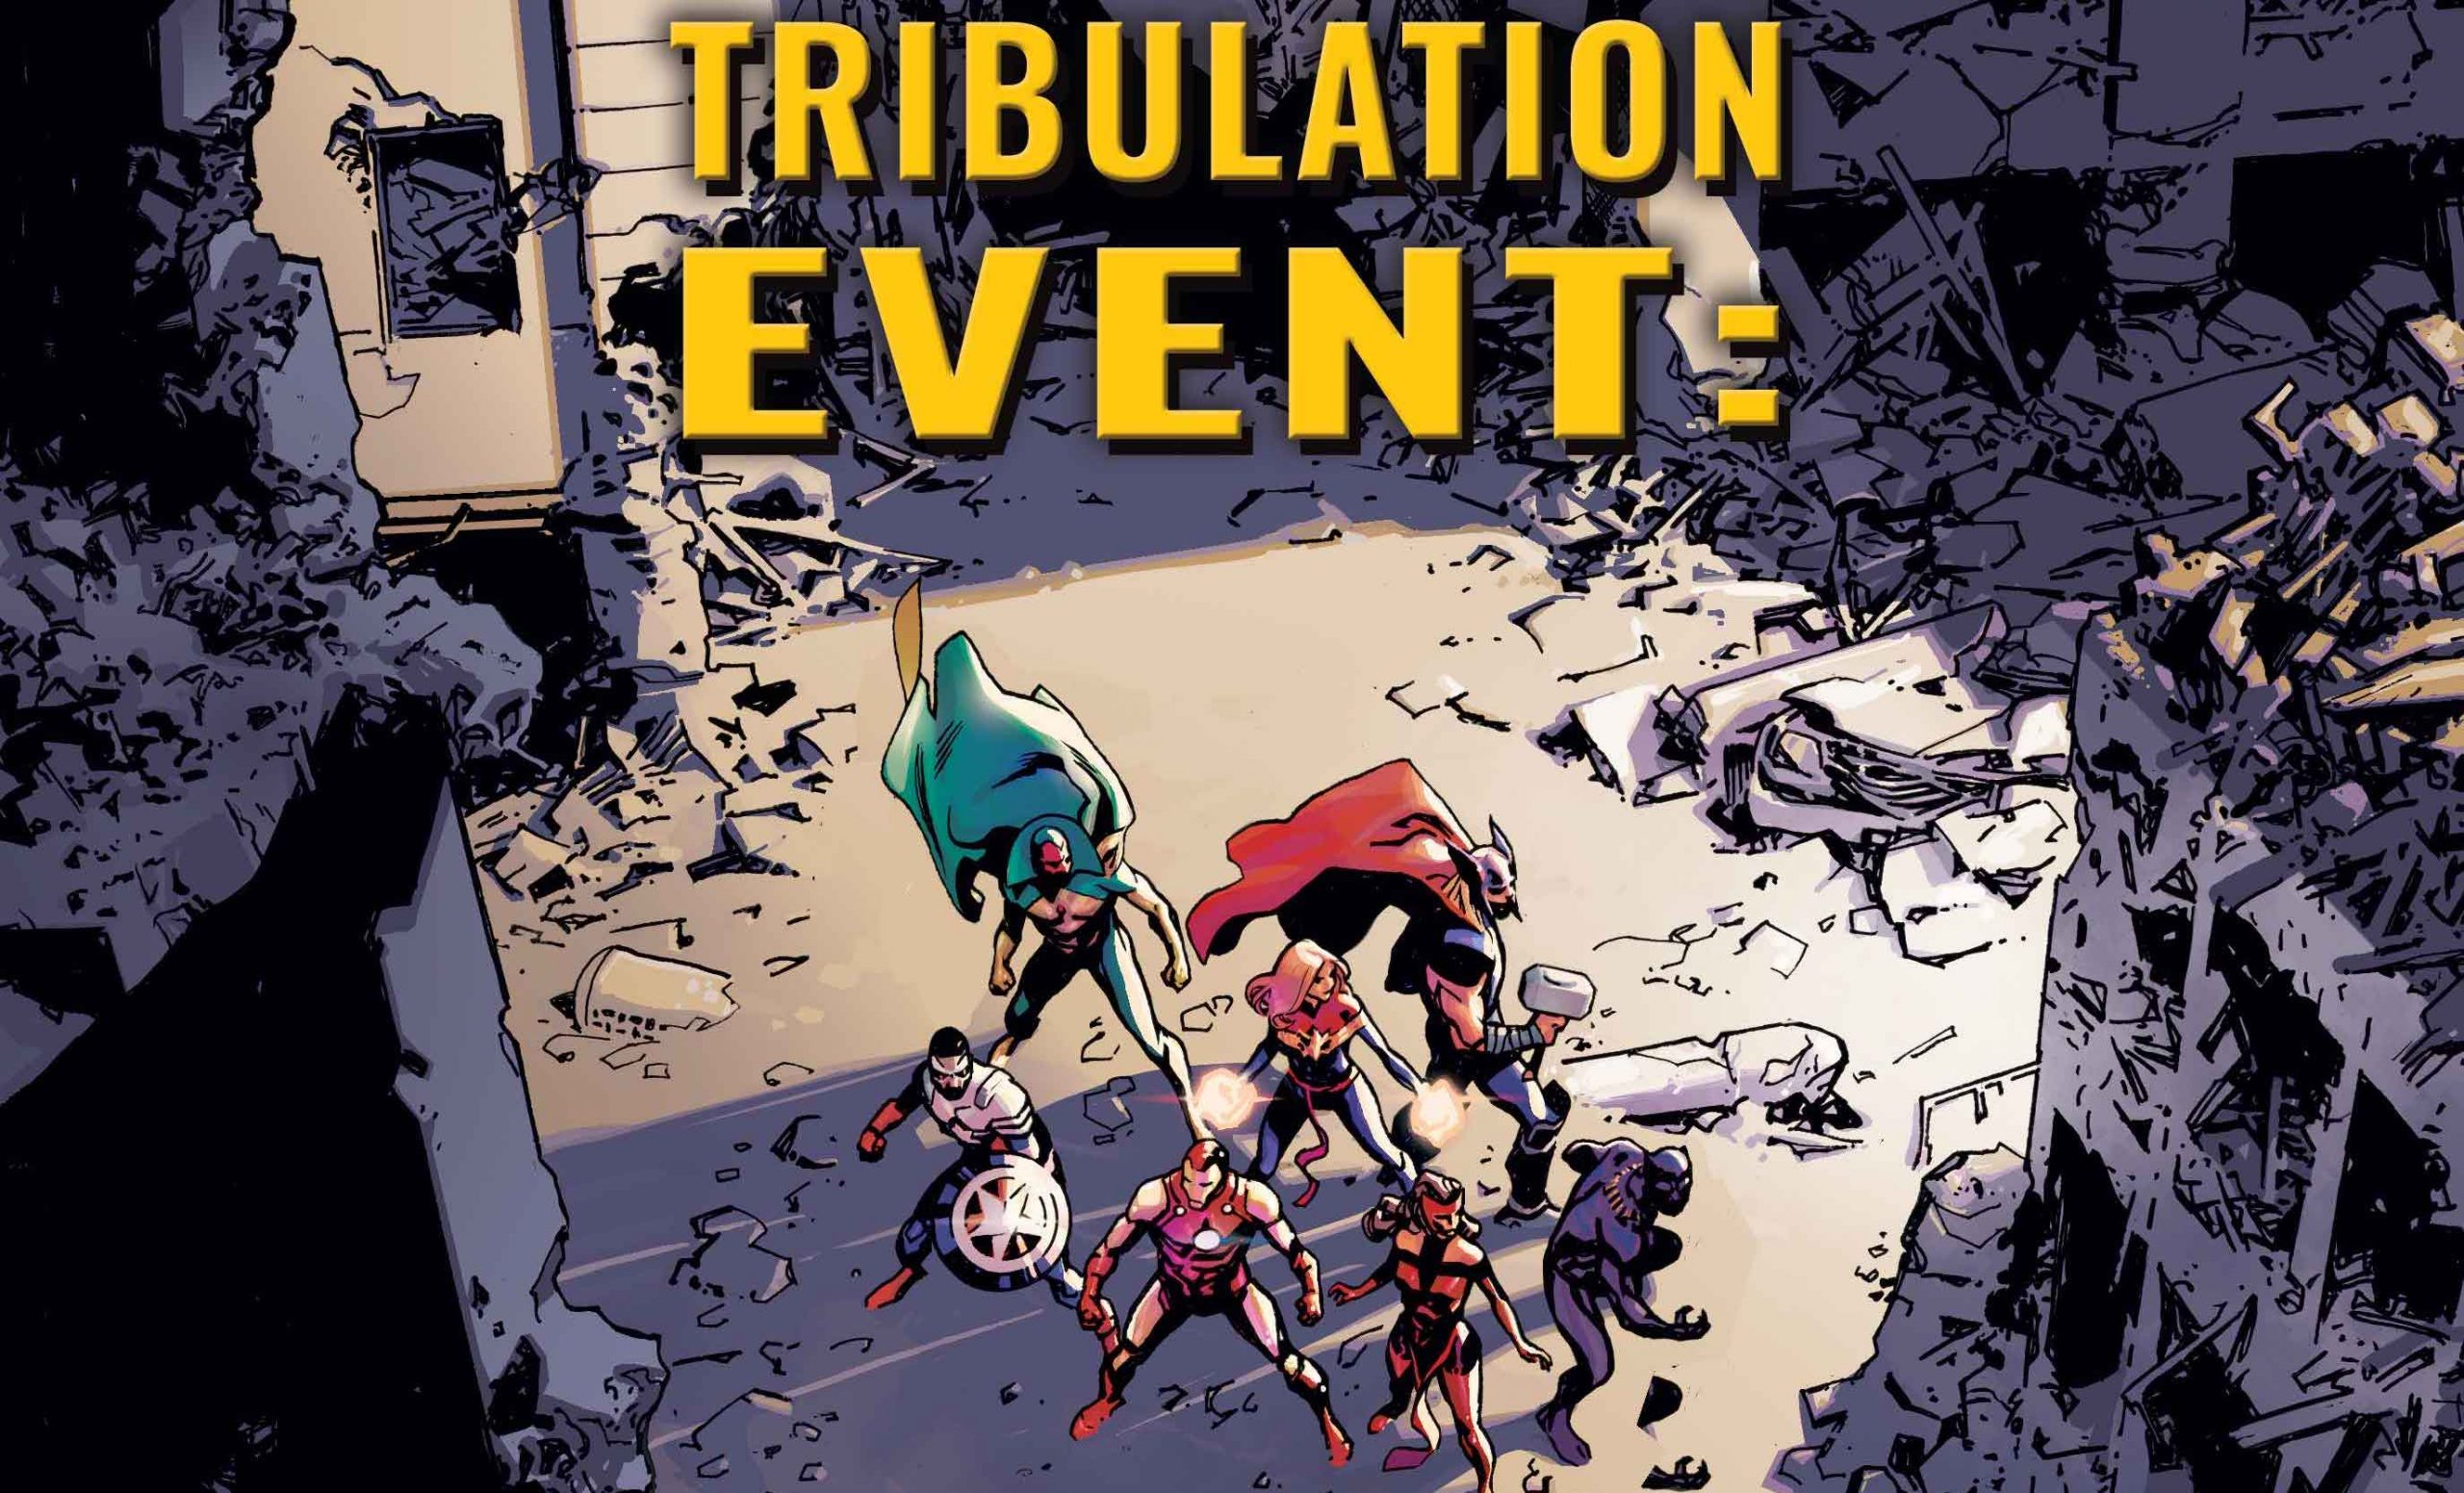 Marvel teases the Avengers to face the first 'Tribulation Event' July 26th